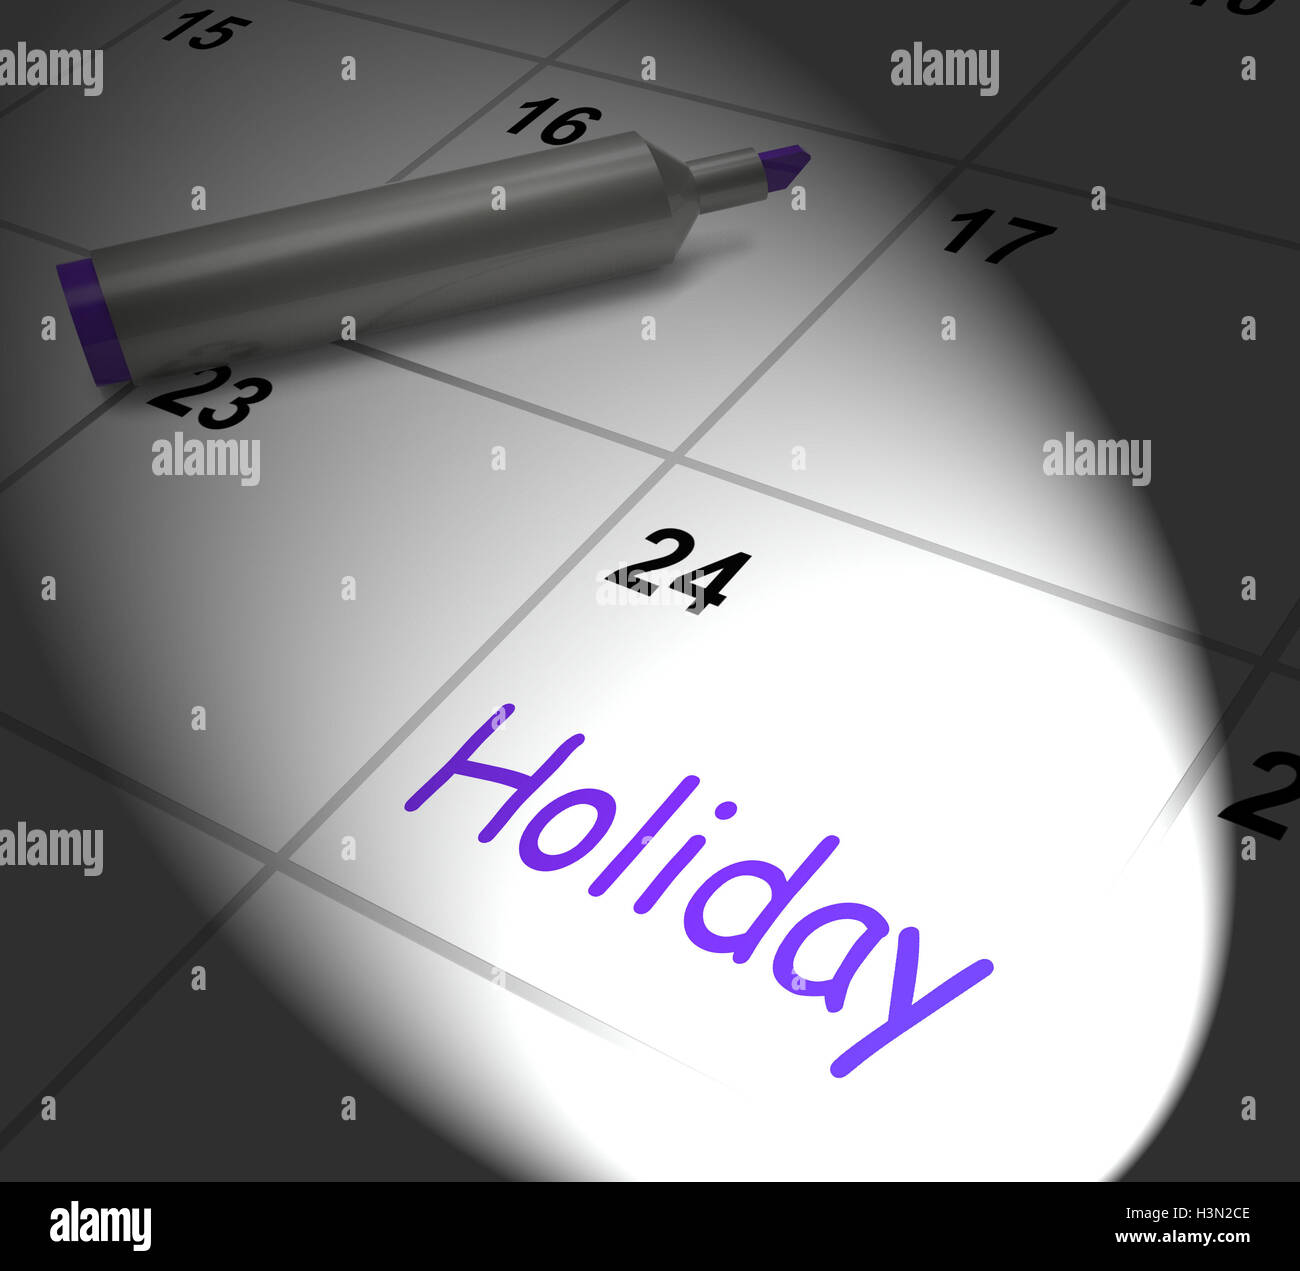 Holiday Calendar Displays Rest Day And Break From Work Stock Photo